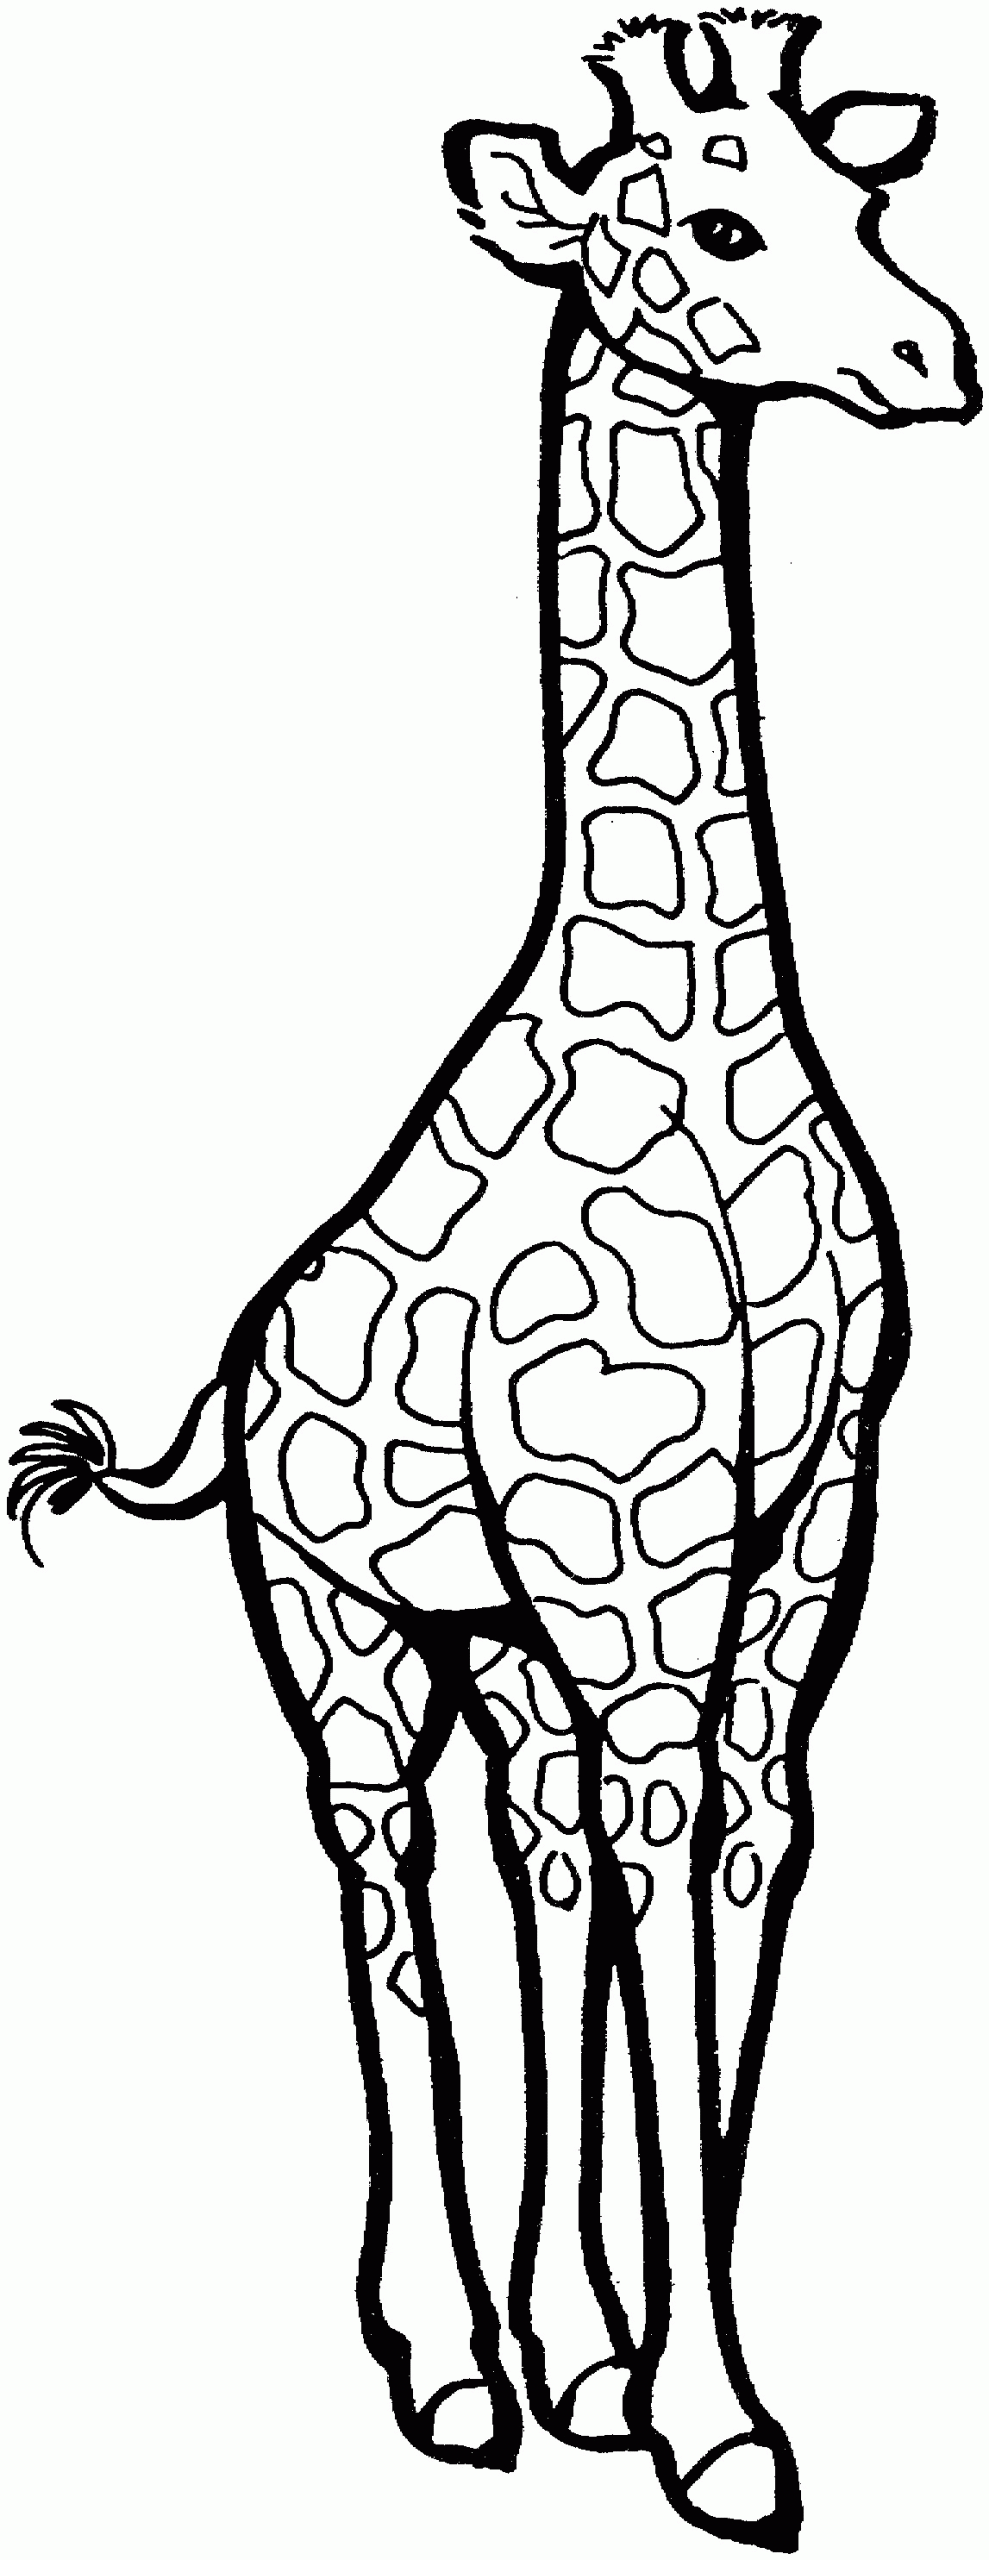 Giraffe Coloring Pages Printable
 Free Giraffe Coloring Pages